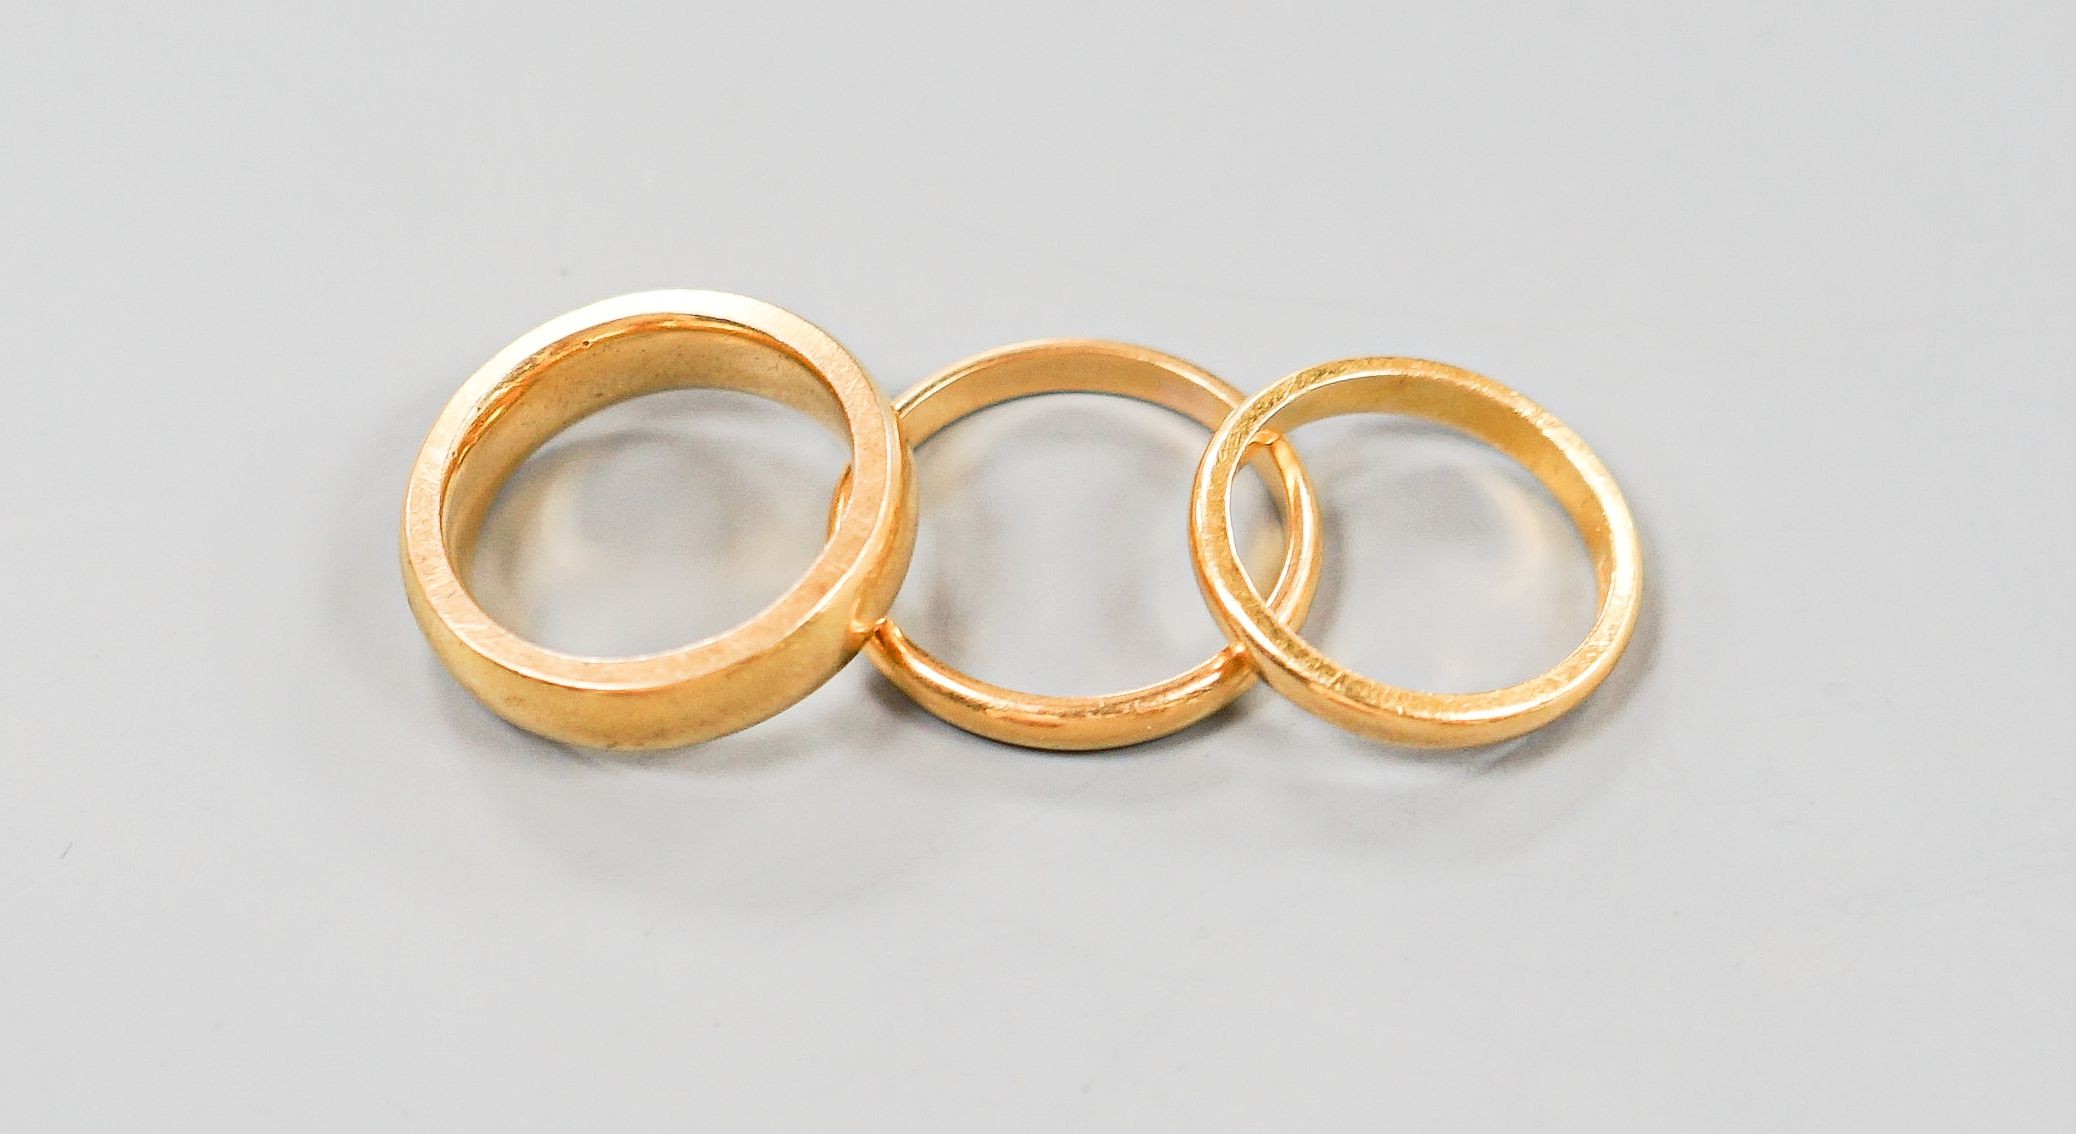 Two 22ct gold wedding bands, 7.1 grams and one other heavy yellow metal band, 12.1 grams.